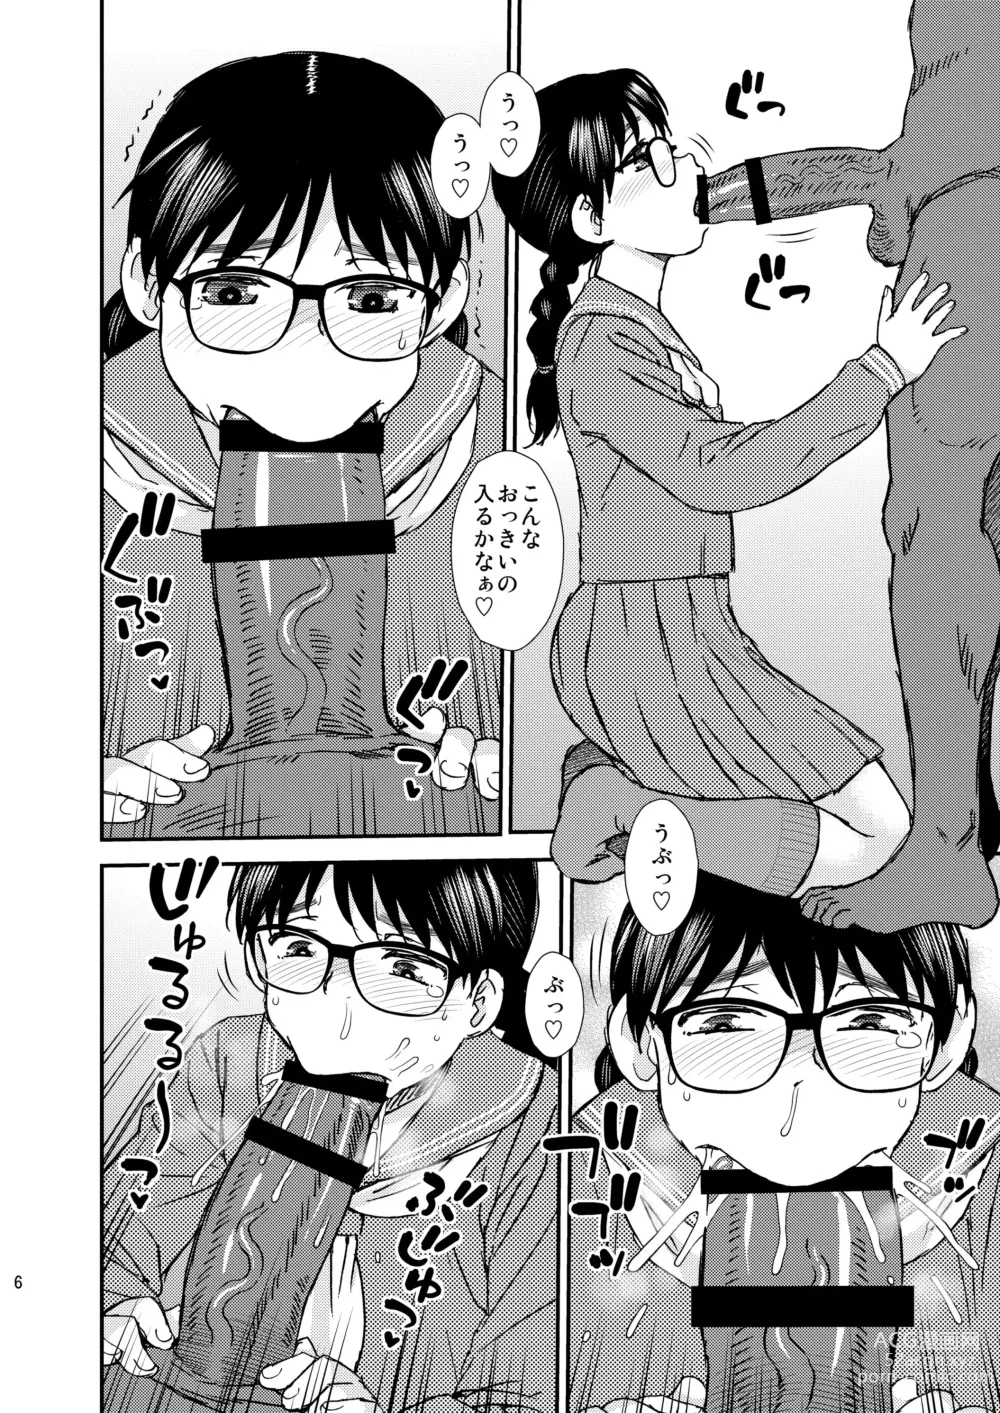 Page 5 of doujinshi Boys Be Cool